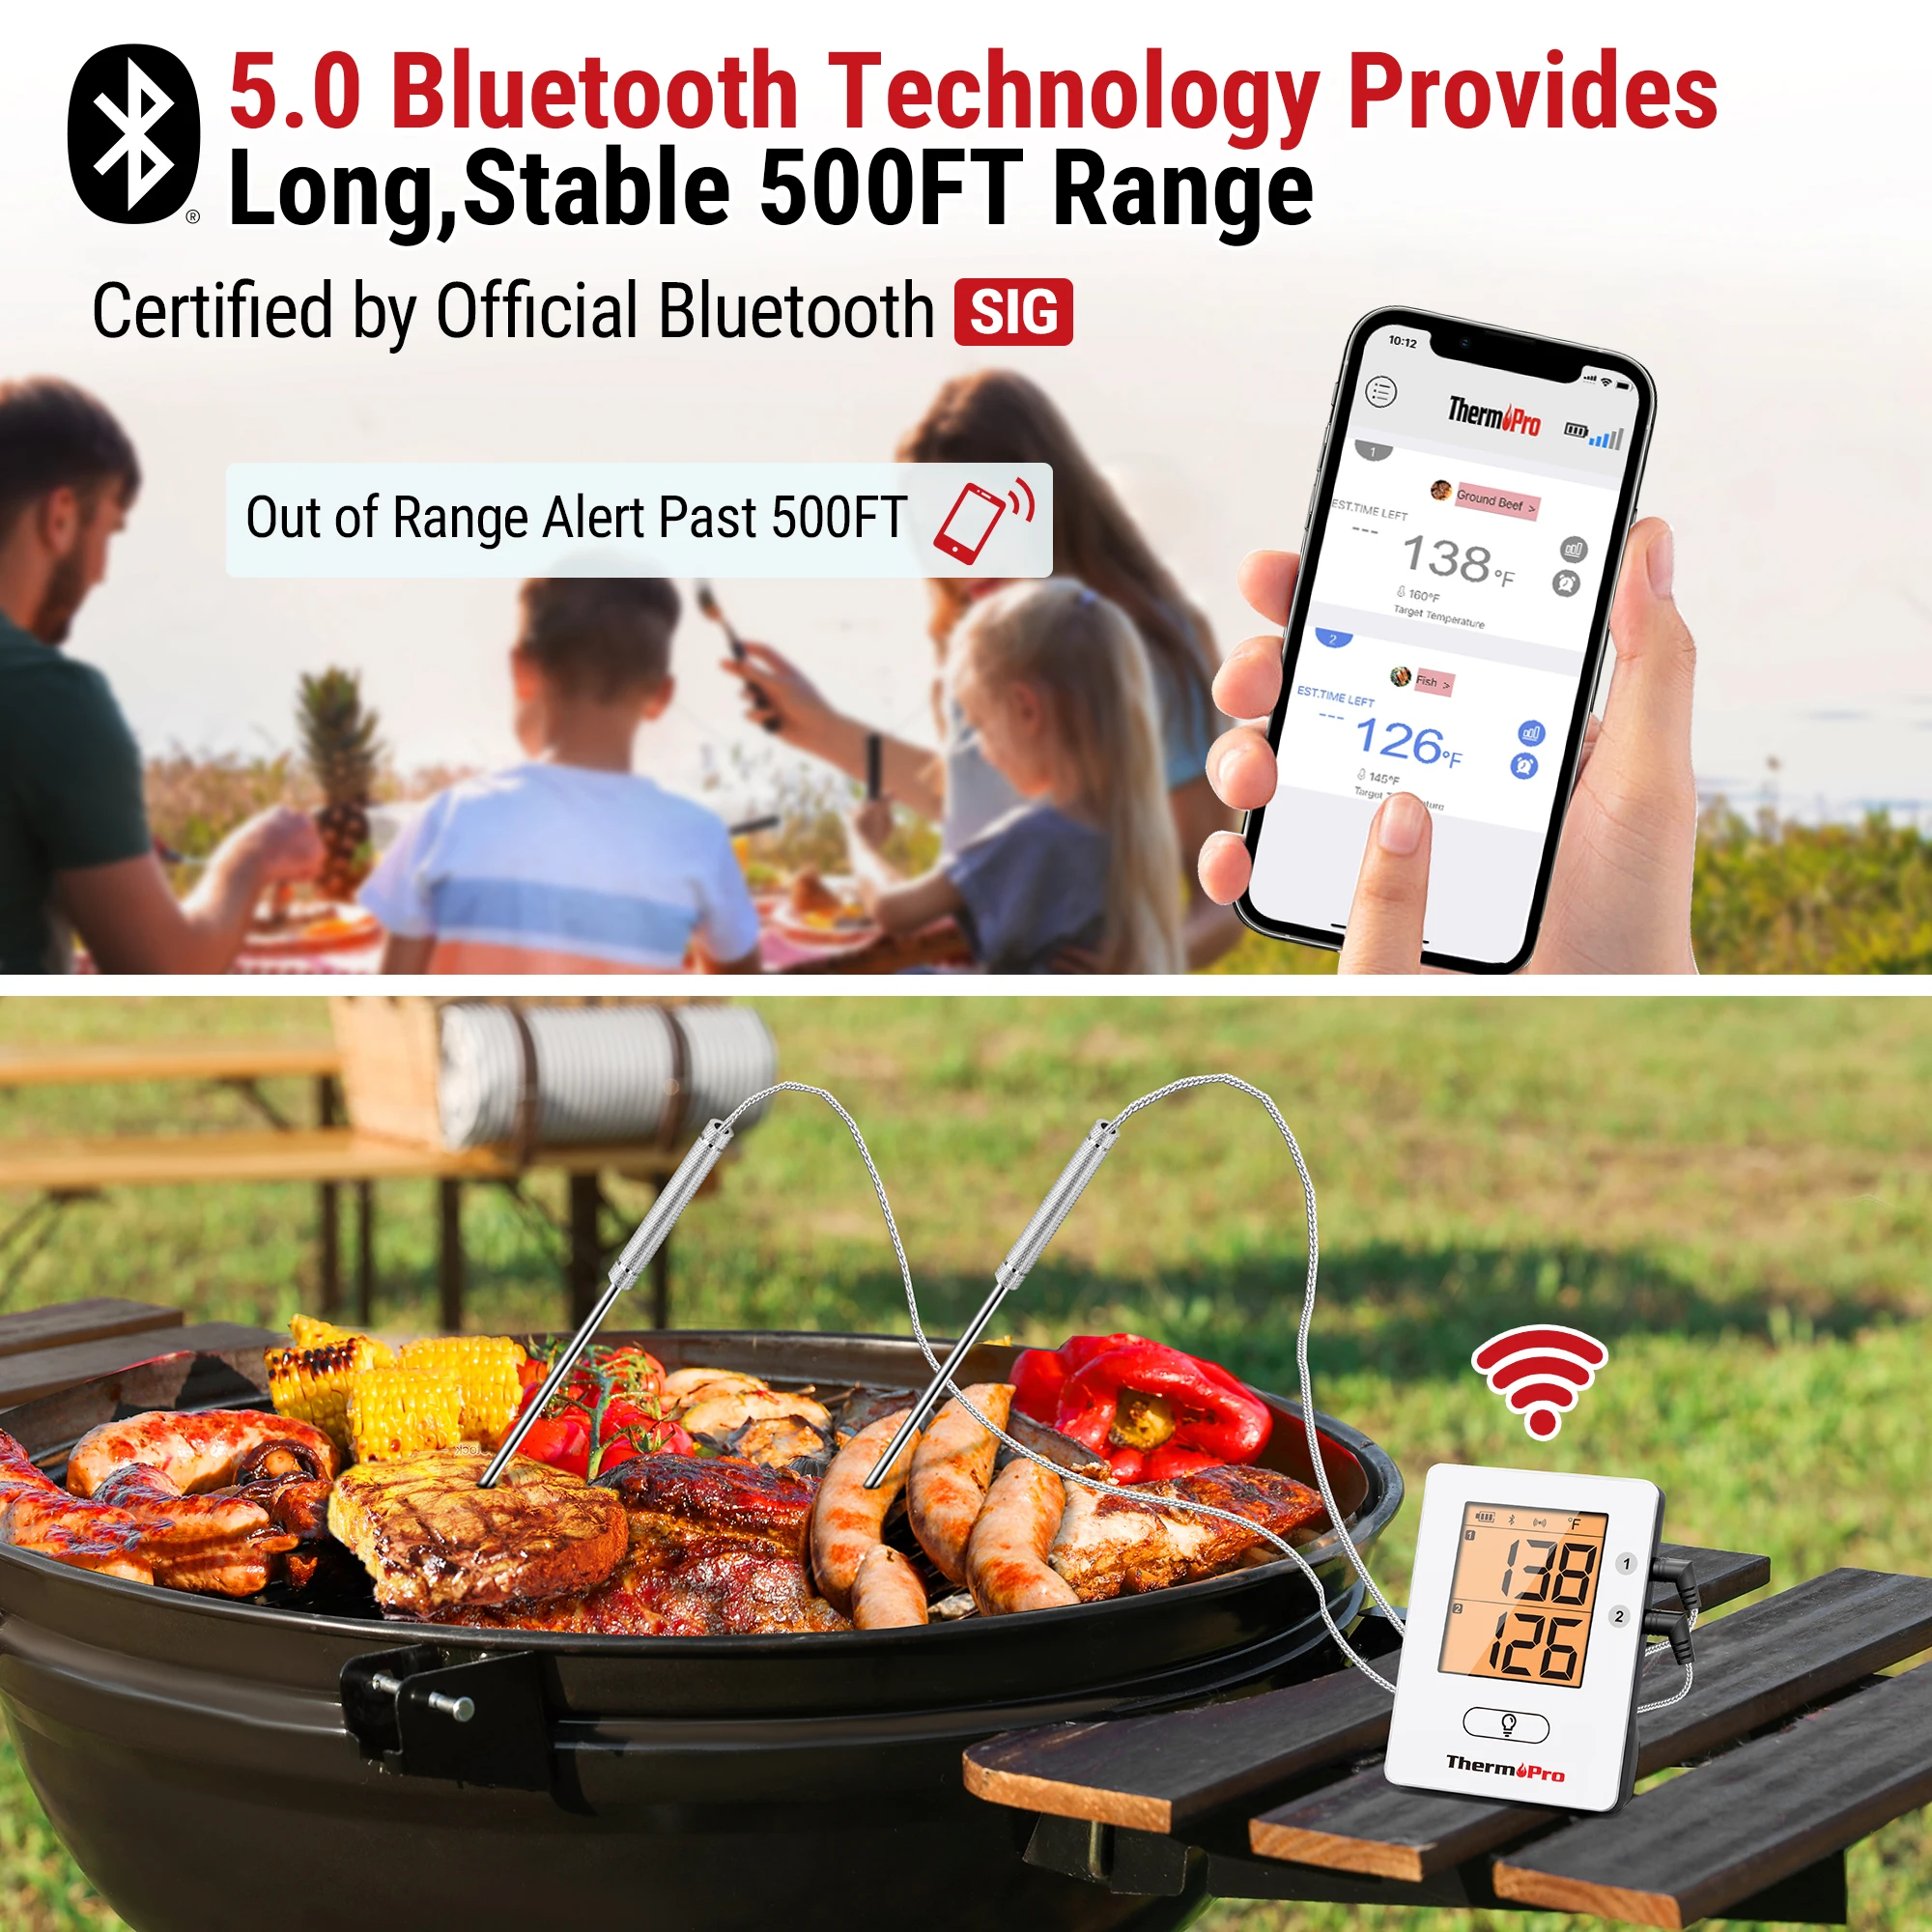 https://ae01.alicdn.com/kf/S21e8ff0dbd8e4df5a178de36421e54faK/ThermoPro-TP910-2-Probes-150M-Wireless-Smart-Bluetooth-Connected-Phone-APP-BBQ-Oven-Meat-Thermometer-For.jpg